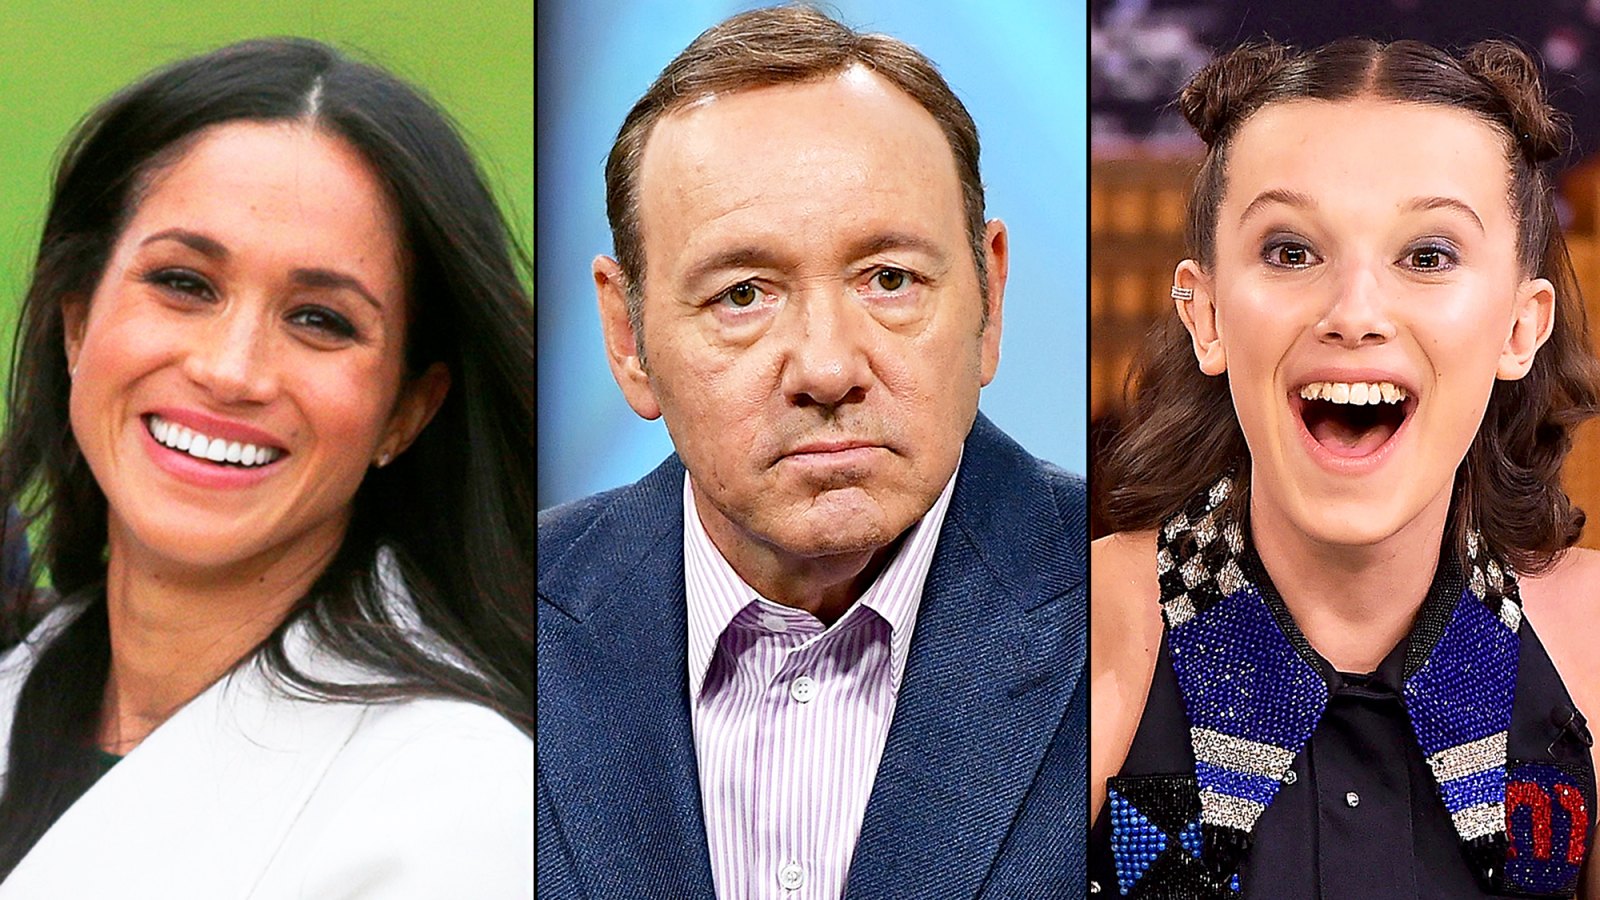 Meghan Markle, Kevin Spacey and Millie Bobby Brown